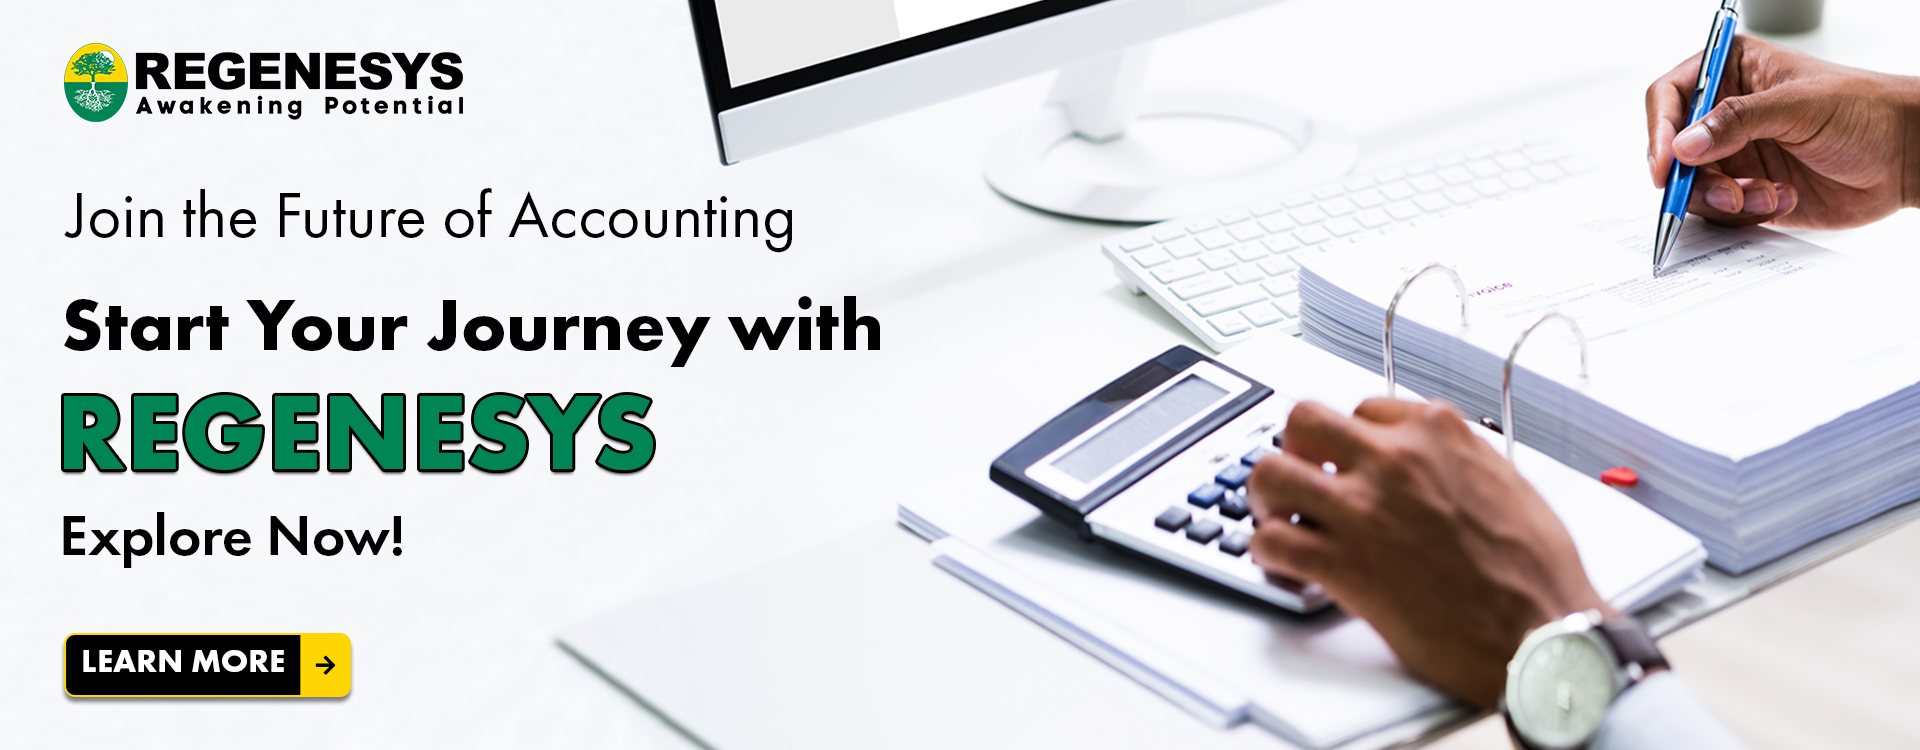 Join the Future of Accounting: Start Your Journey with Regenesys! Explore Now!